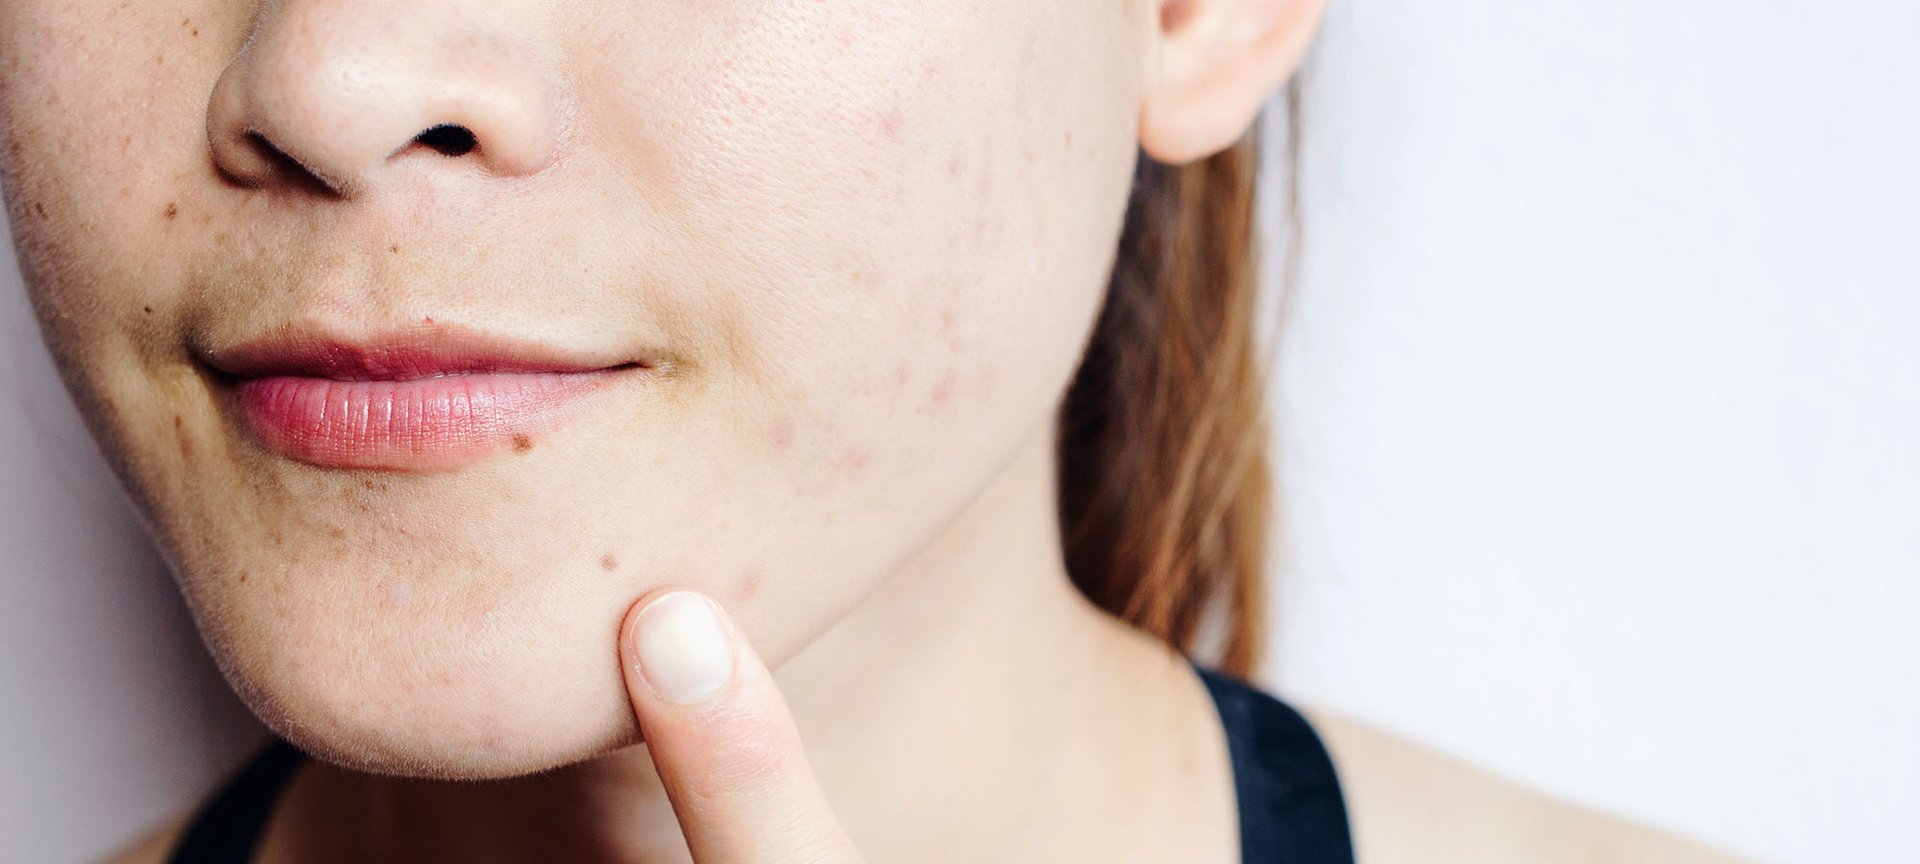 Clogged Pores: What Causes Them and How to UnClog Pores - L'Oréal